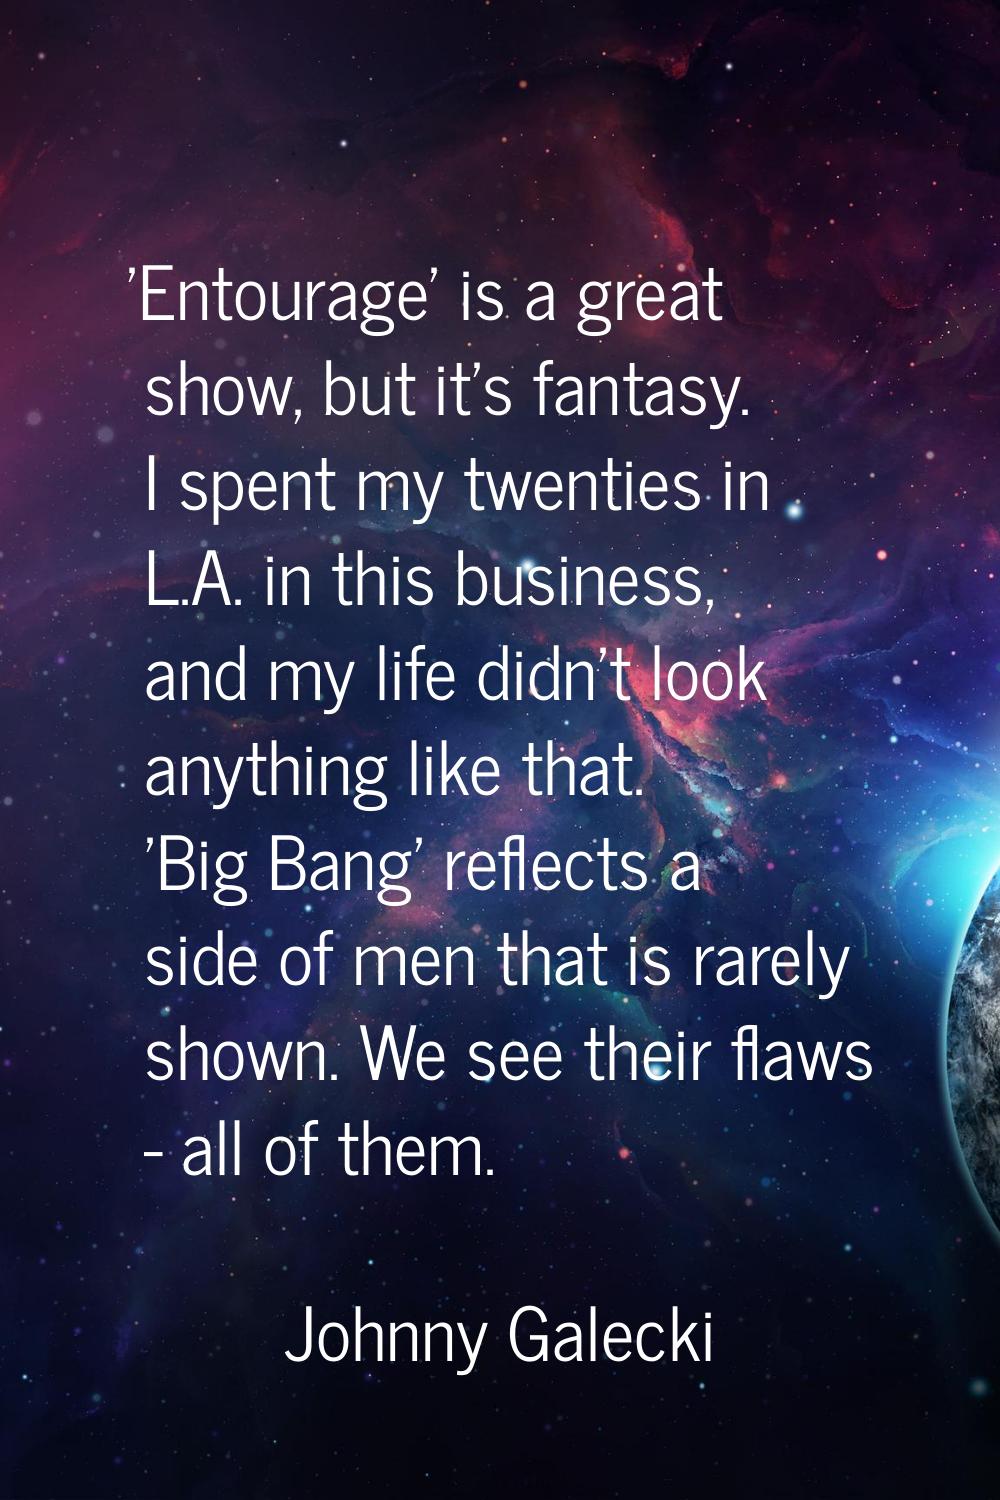 'Entourage' is a great show, but it's fantasy. I spent my twenties in L.A. in this business, and my